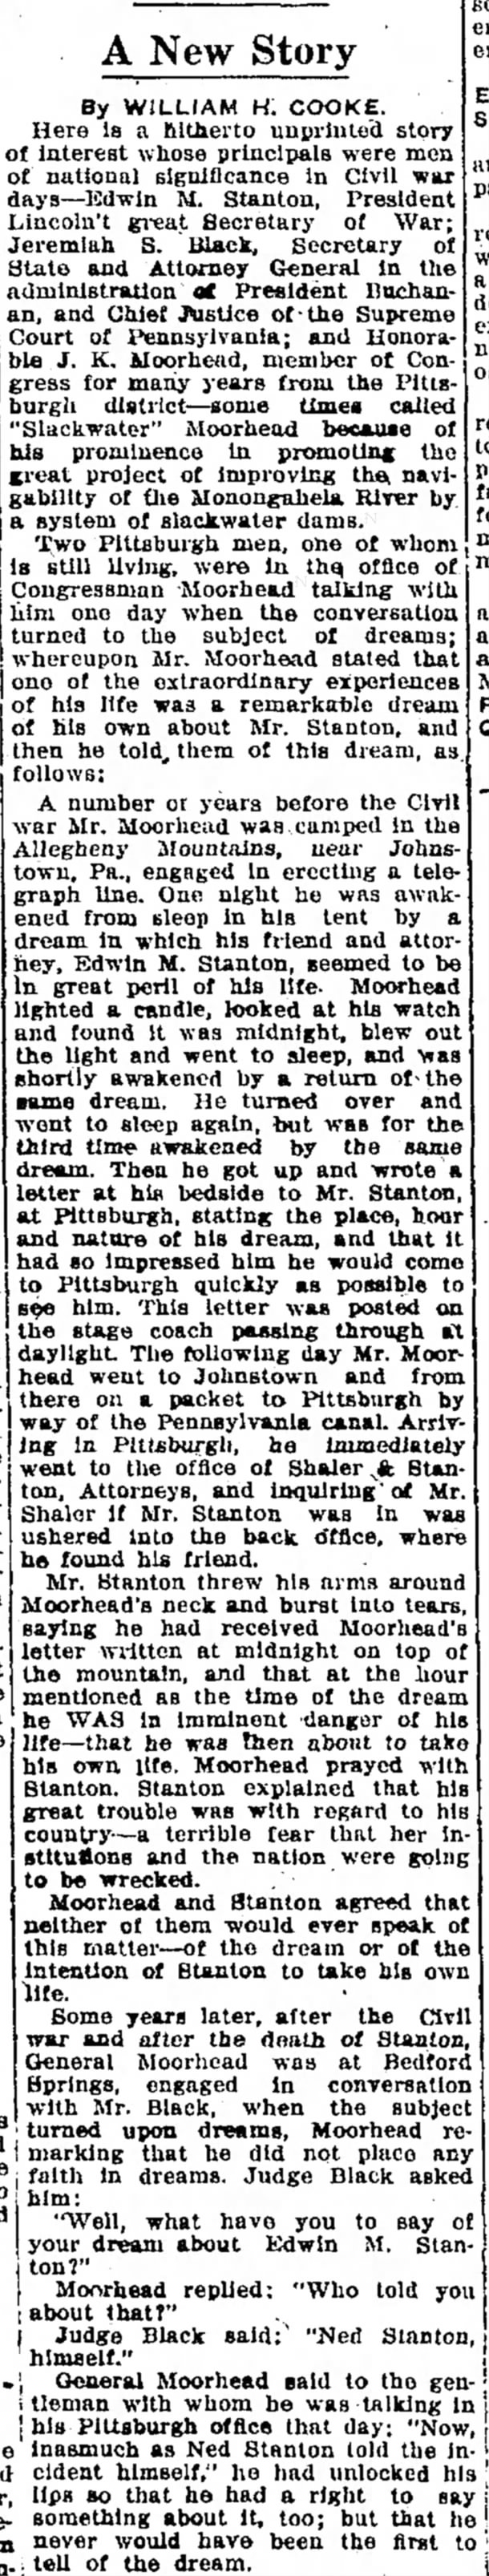 The Morning Herald, Uniontown, PA 3 Apr 1929, page 4